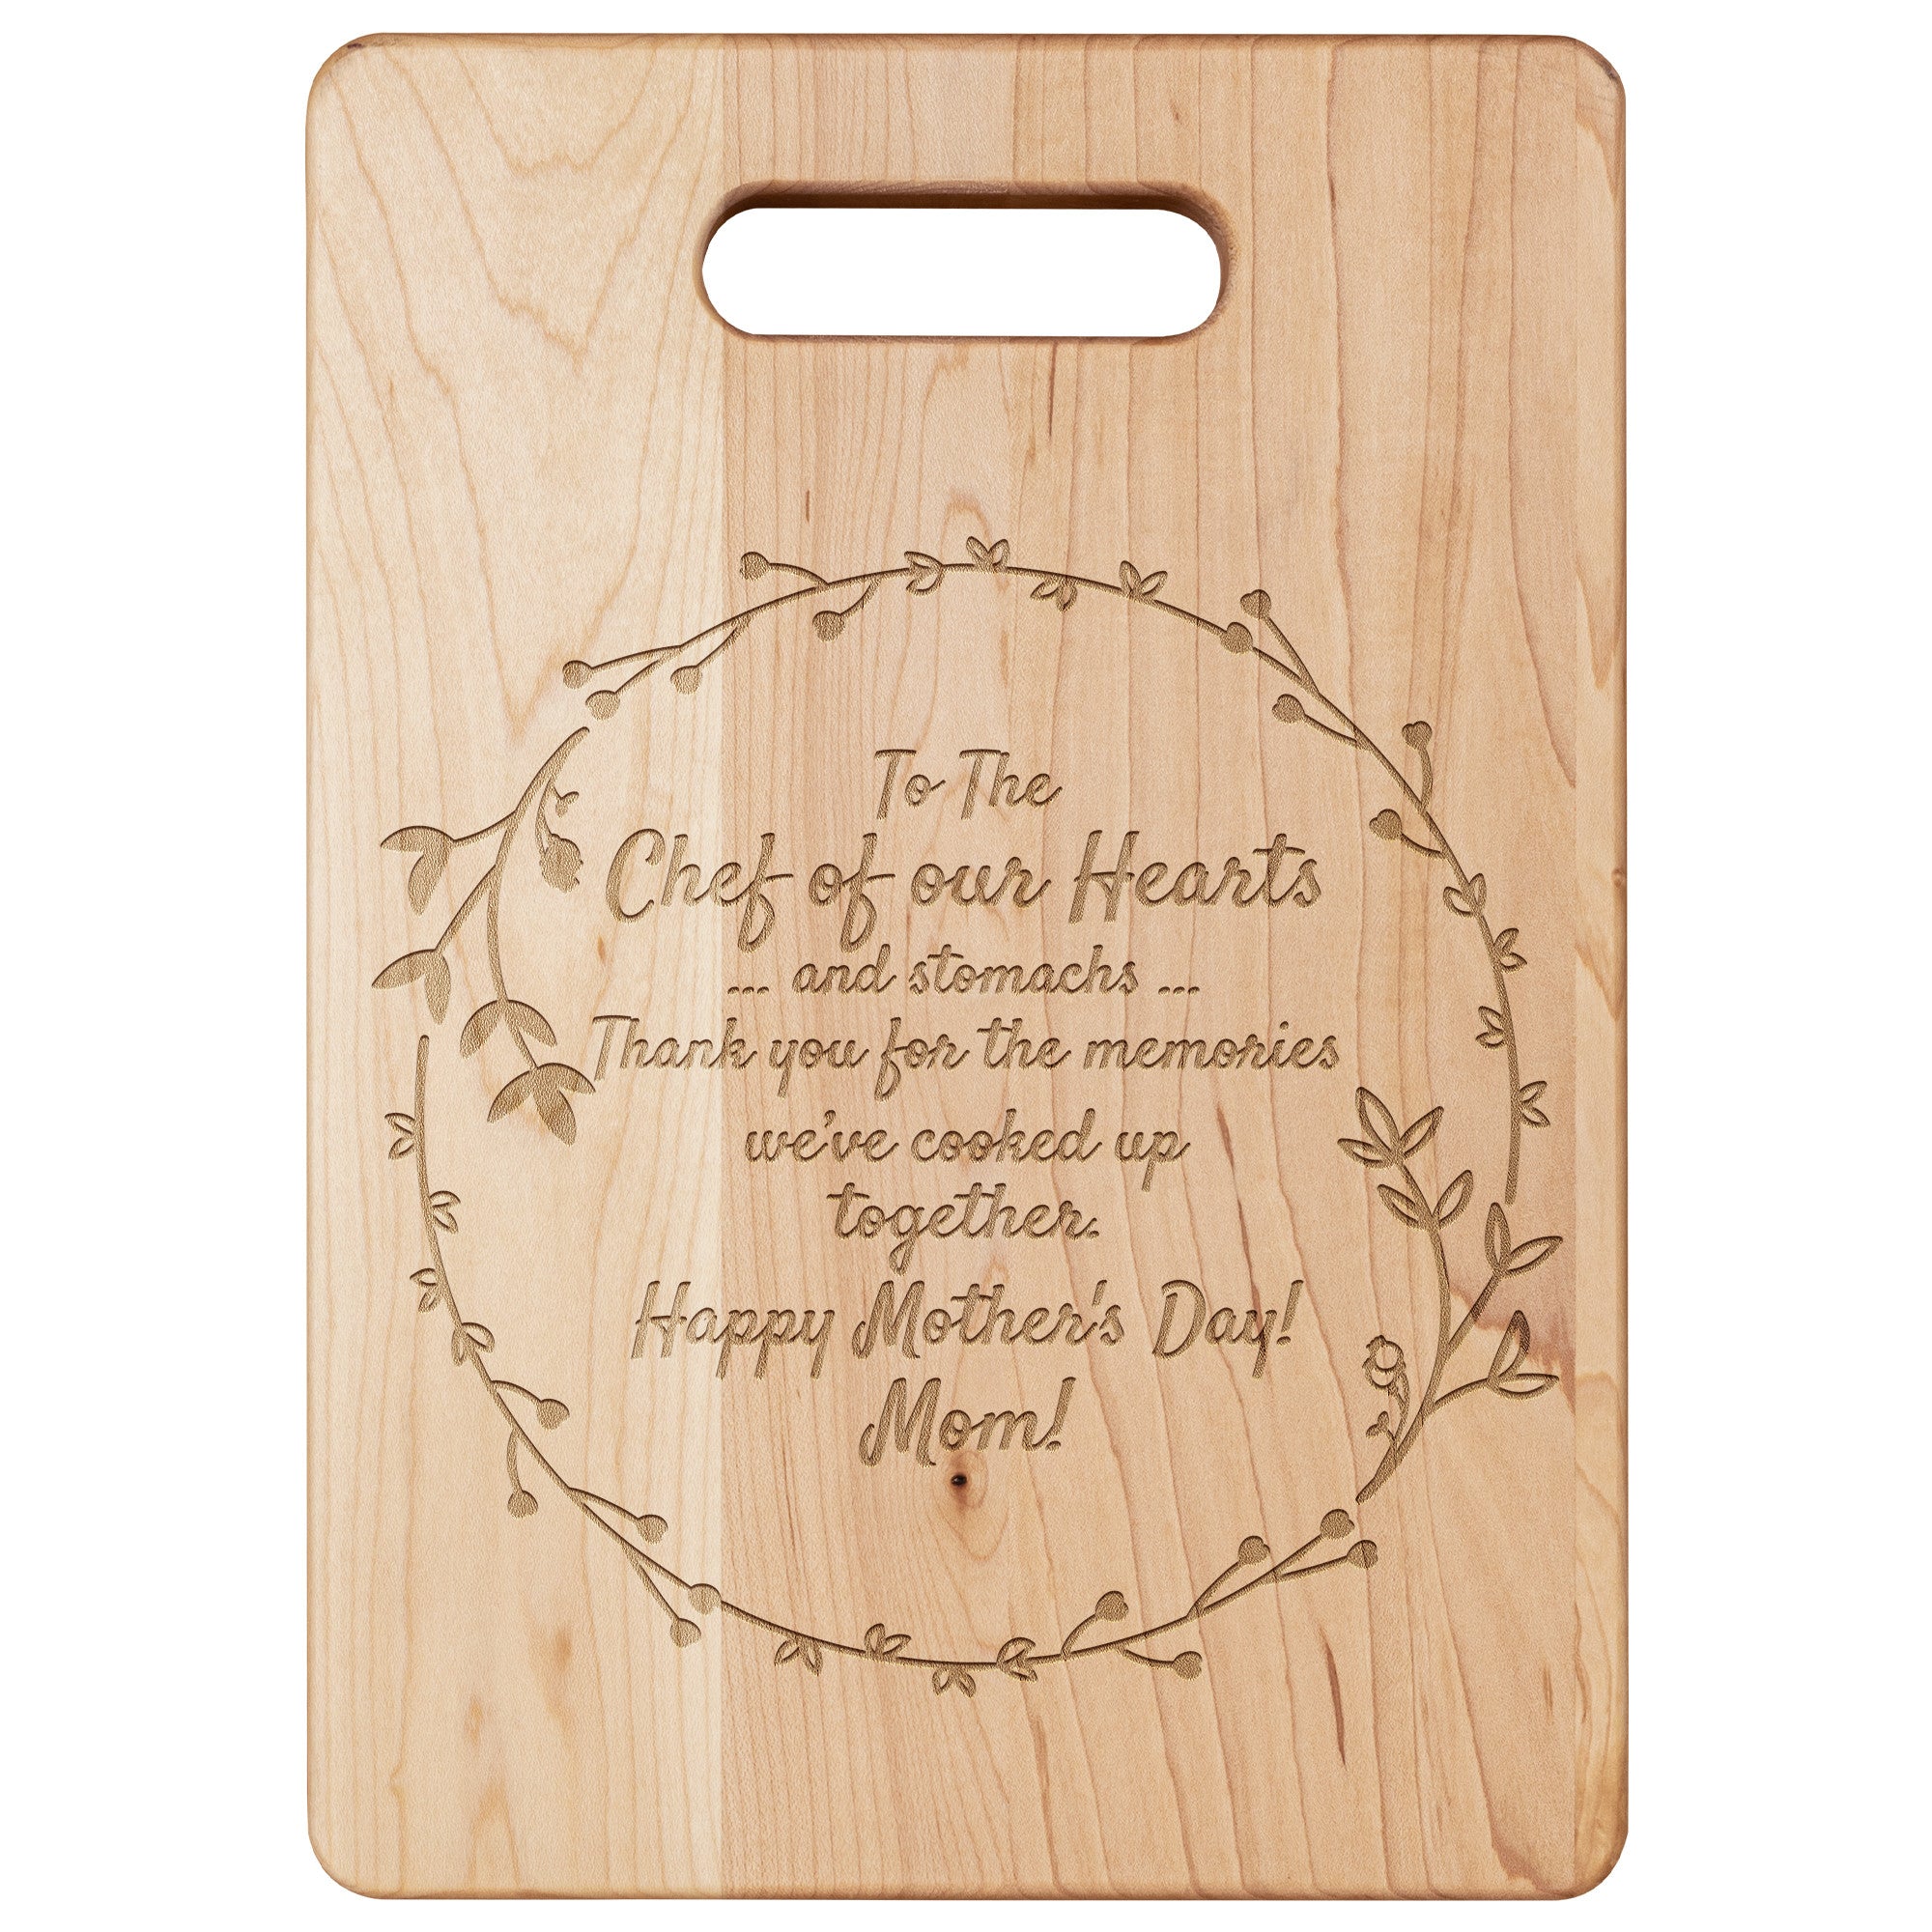 Chef of Our Hearts - Cutting Board for Mother's Day